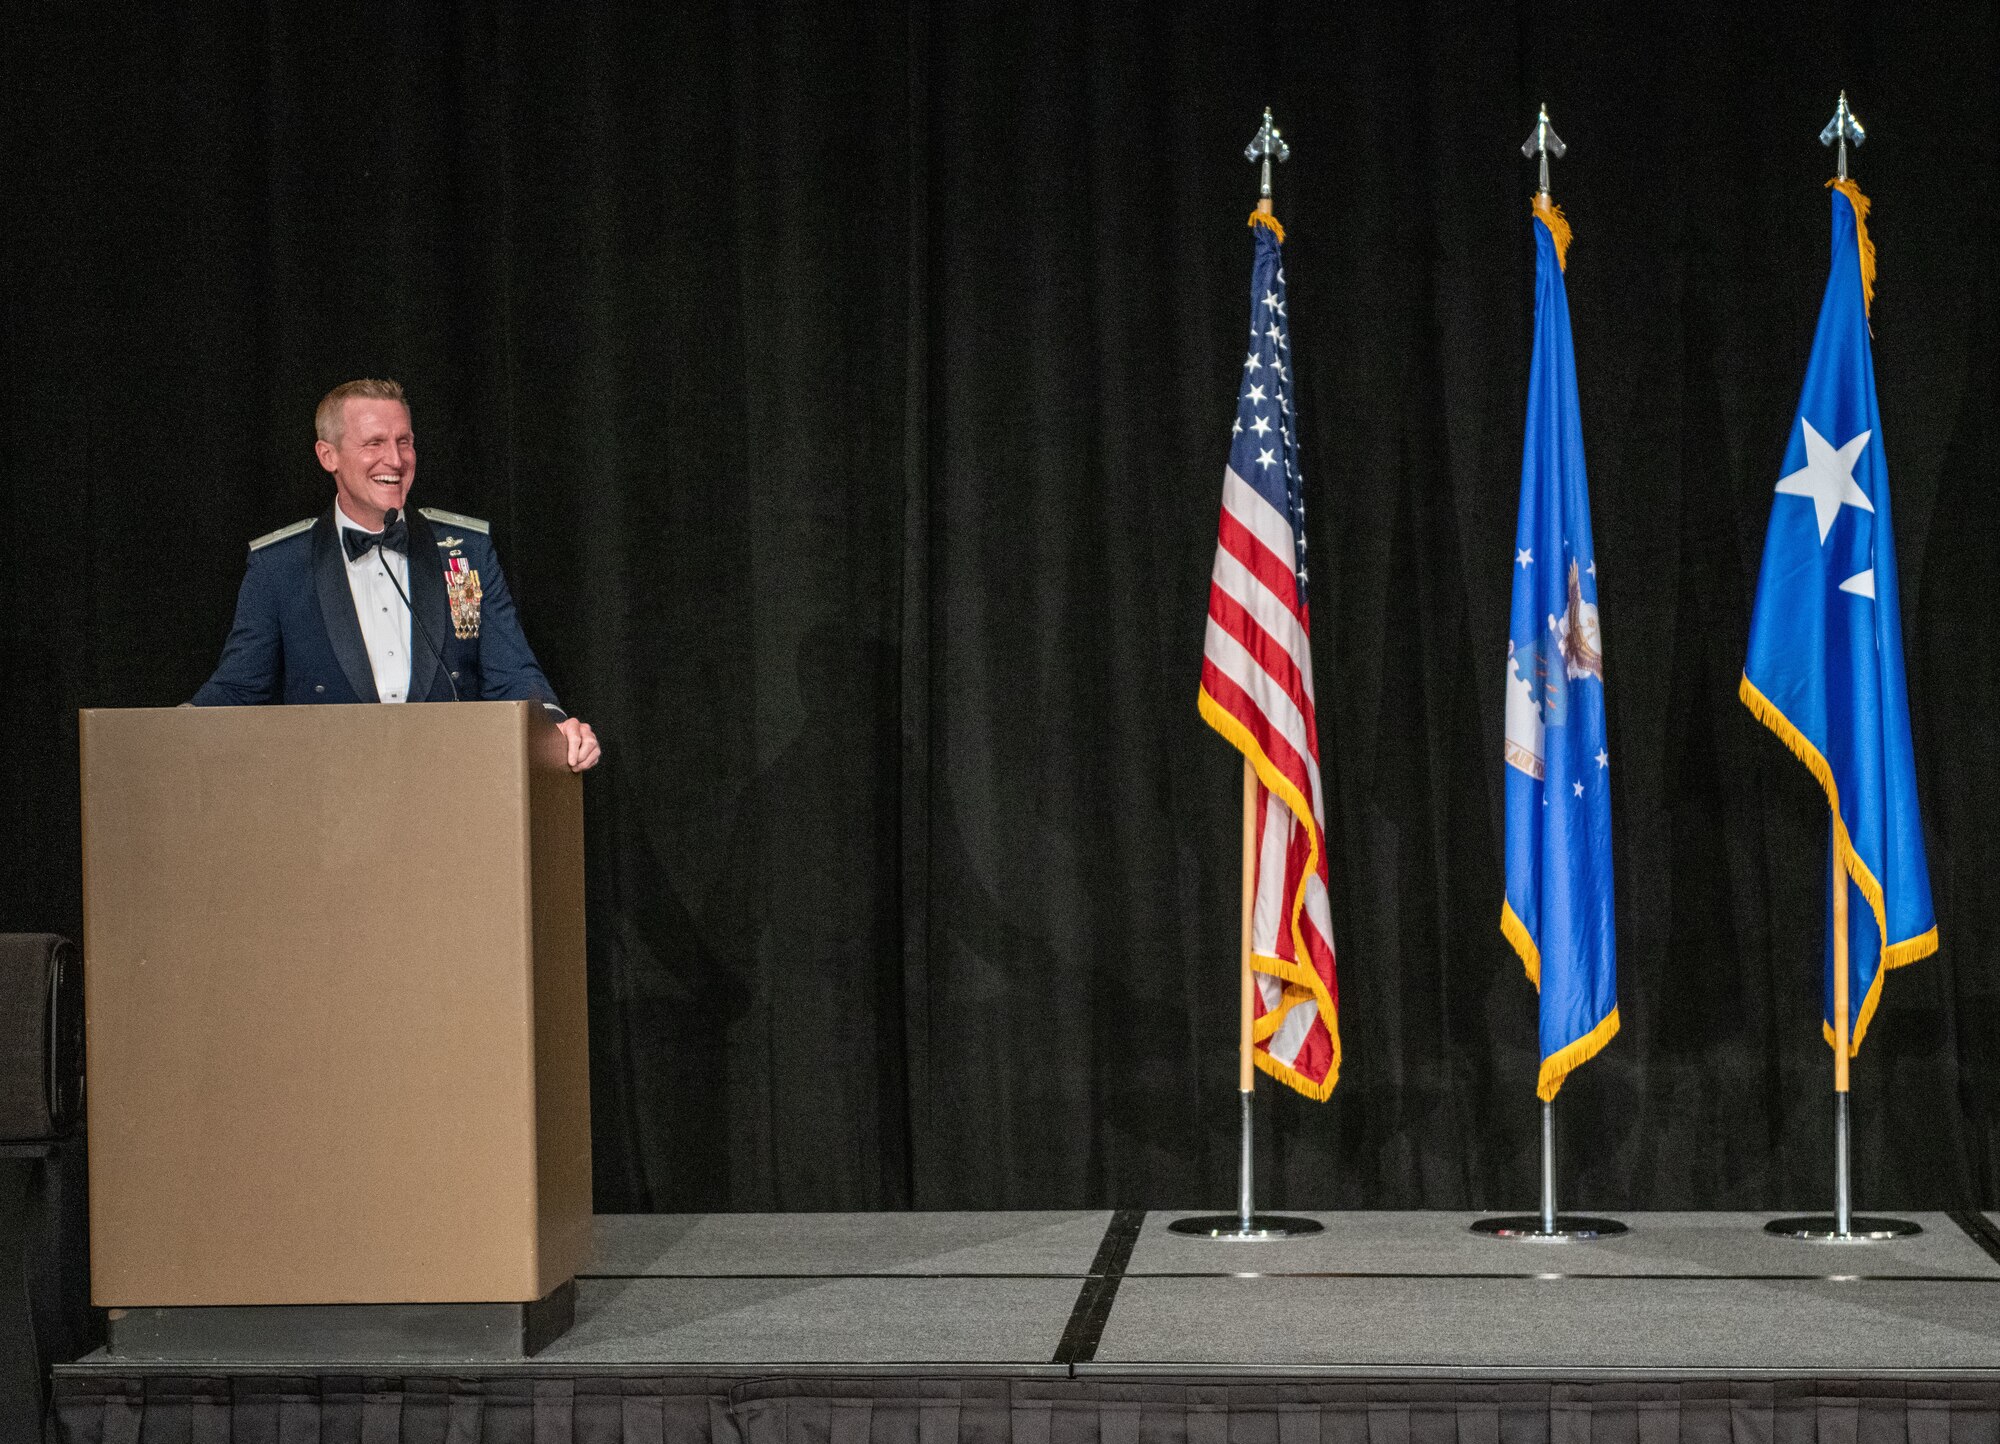 U.S. Air Force Brig. Gen. Jason Rueschhoff, 56th Fighter Wing commander, delivers his closing remarks during the 75th Air Force Ball at the Wigwam Resort near Luke Air Force Base, Arizona on Sept. 24, 2022.